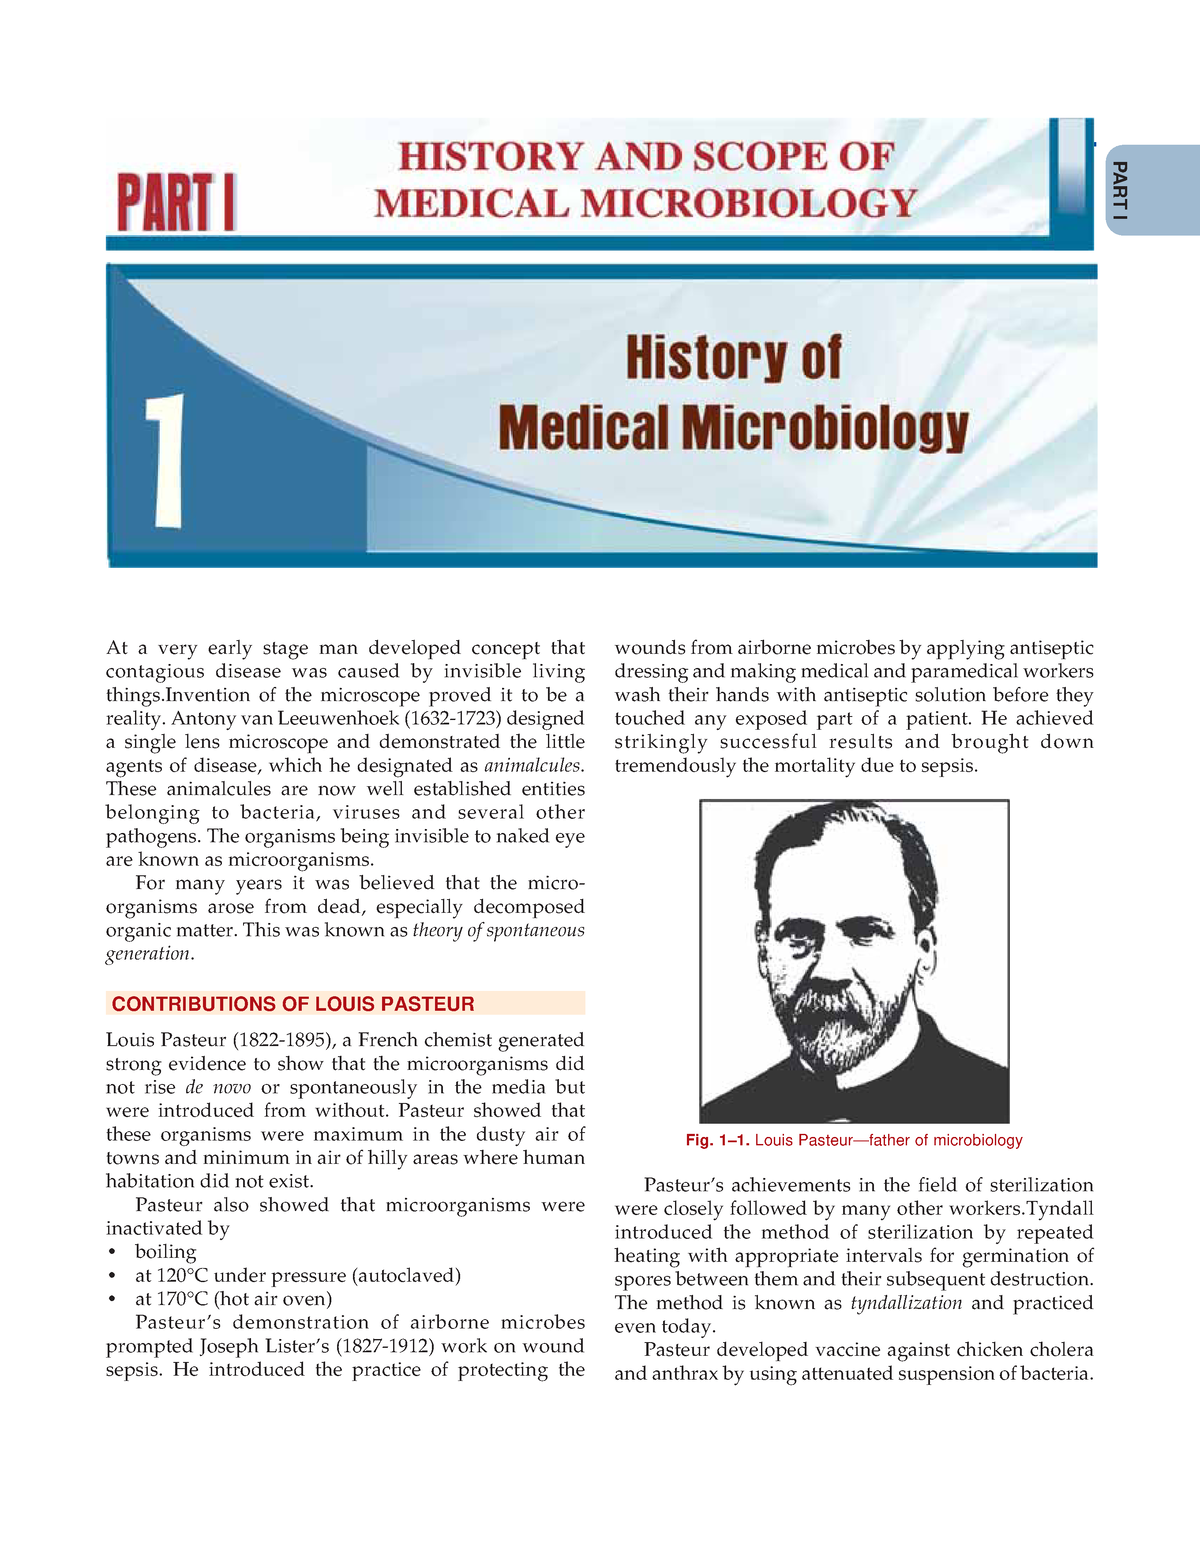 assignment on history of microbiology